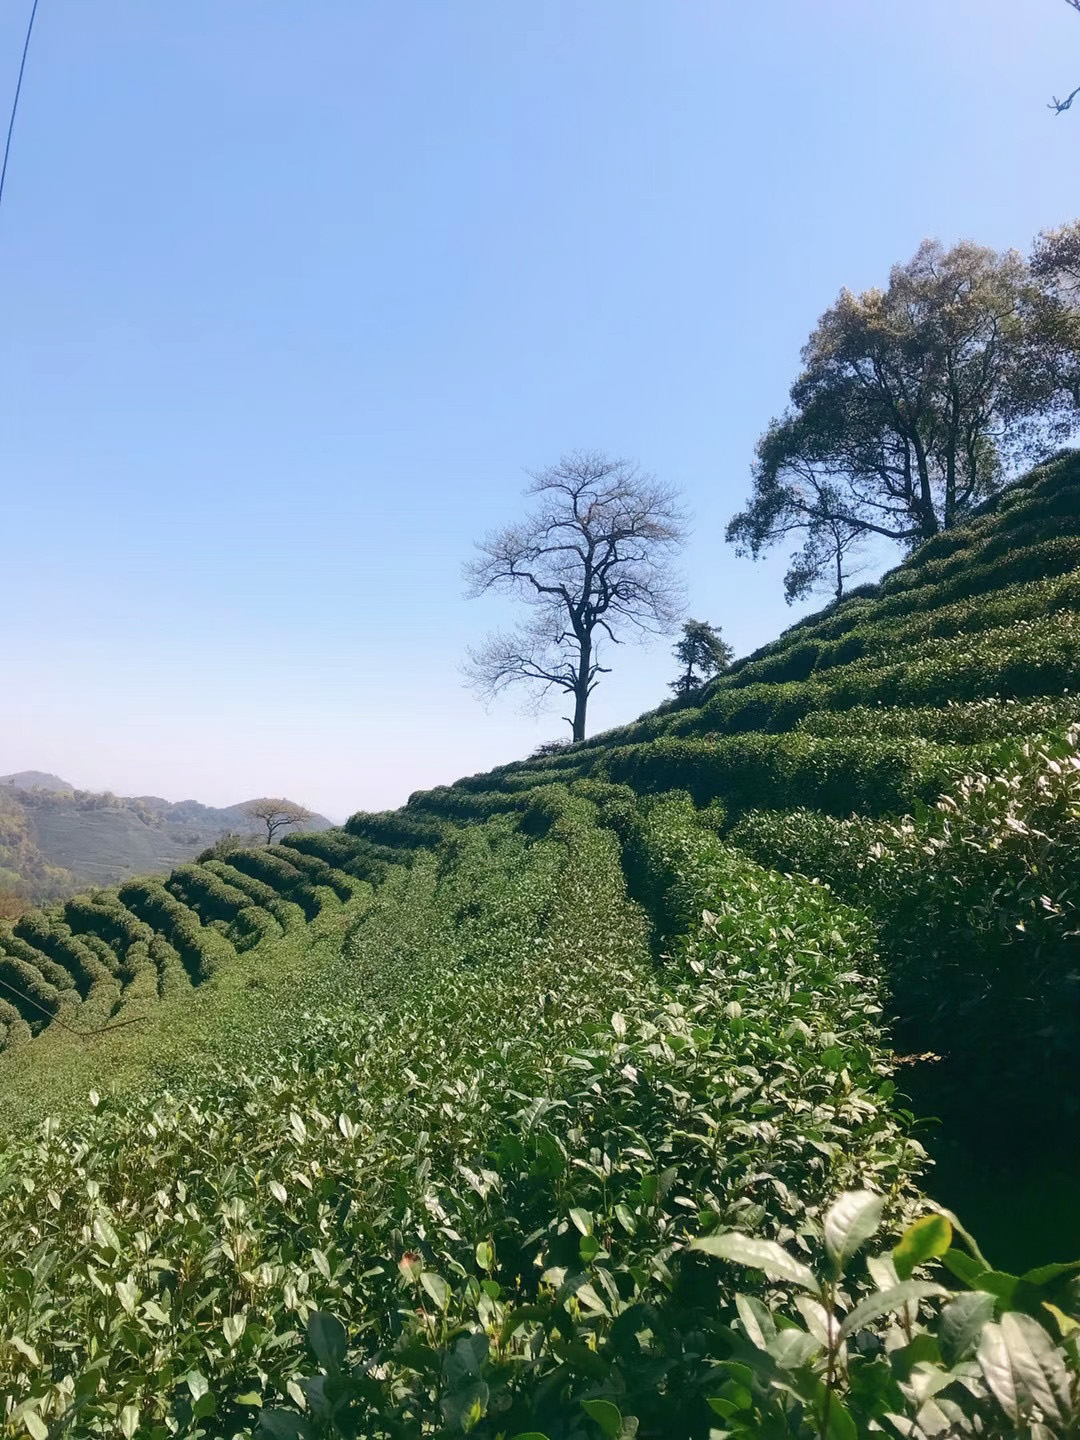 Looking at the bushes in a tea terrace from among the rows, with a few trees rising above the tea plants.